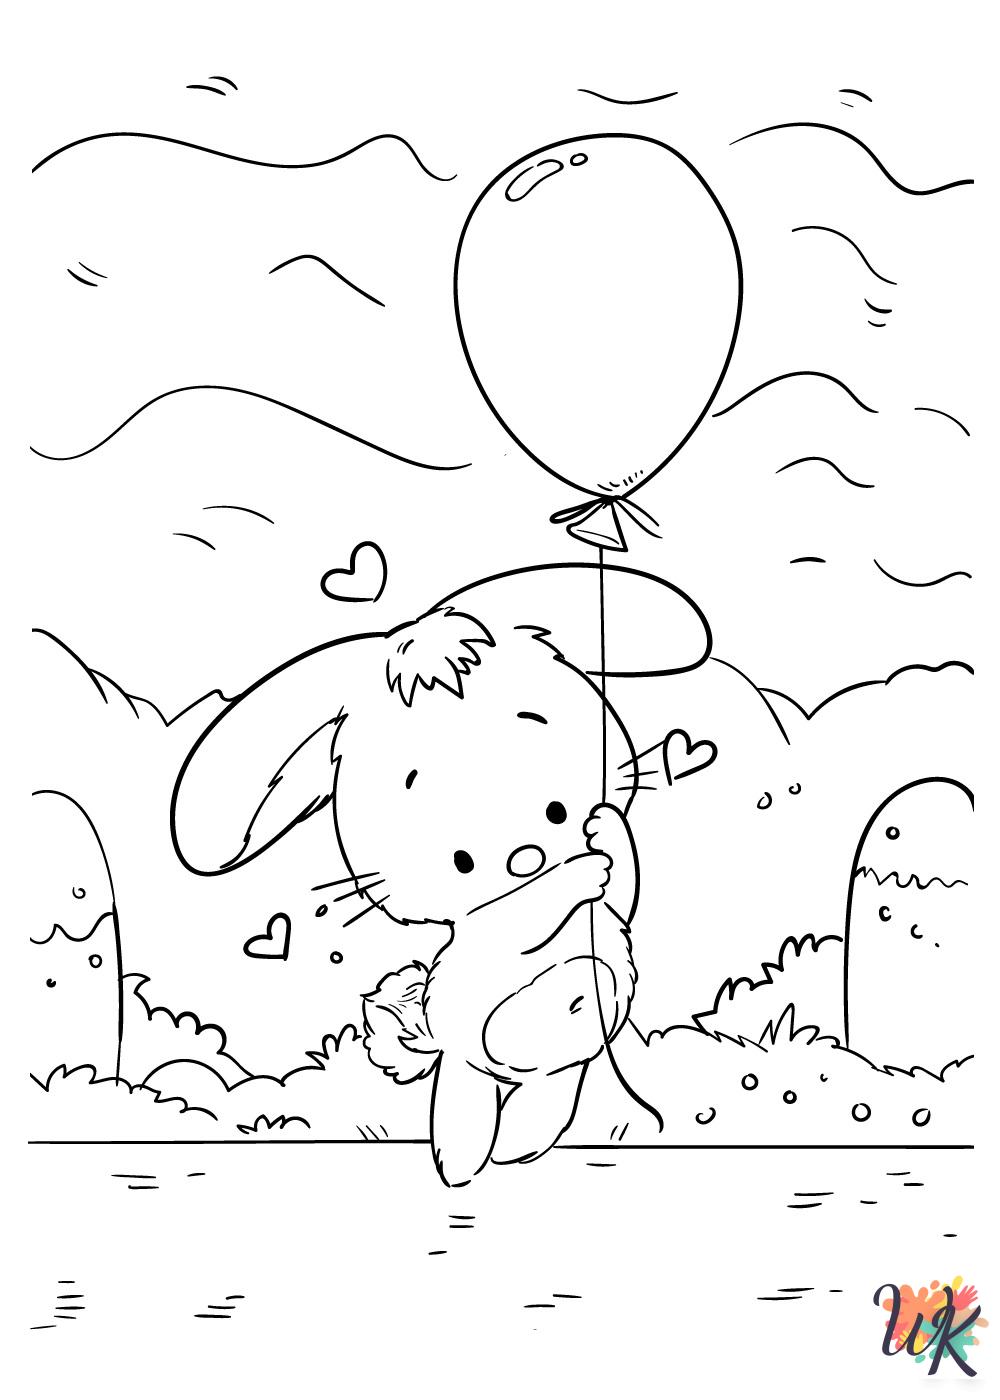 Cute Animals coloring pages to print